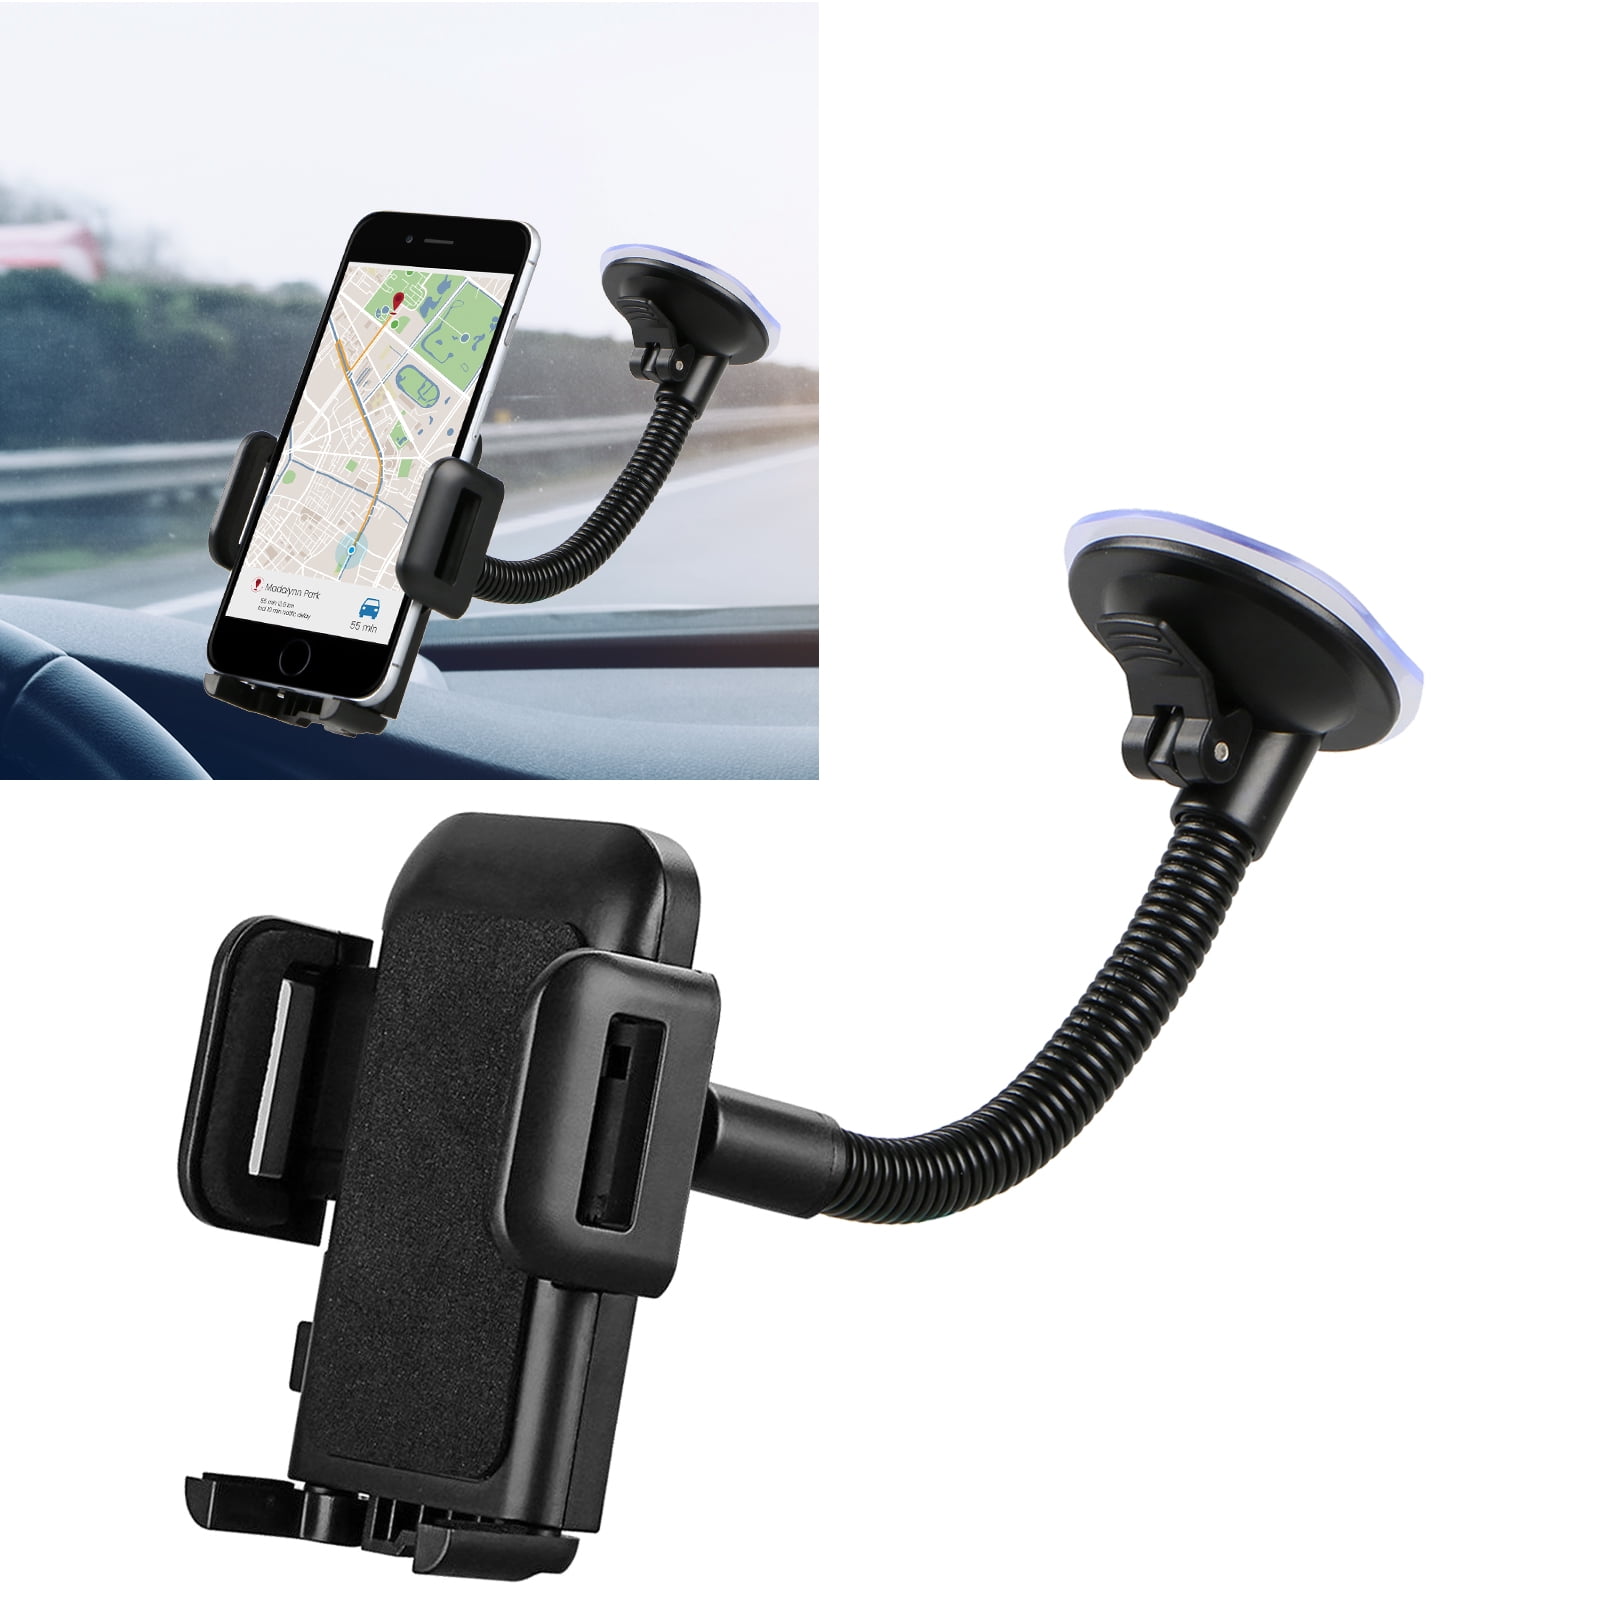 Car Phone Holder Car Holder Windscreen Car Mount Grip Flex Universal Long Arm Windshield Car Cradle with Extra Dashboard Base for iPhone13Pro Max 12Pro 11 XsMax Xs Xr X 8 7,Galaxy S20/10 Note LG,etc